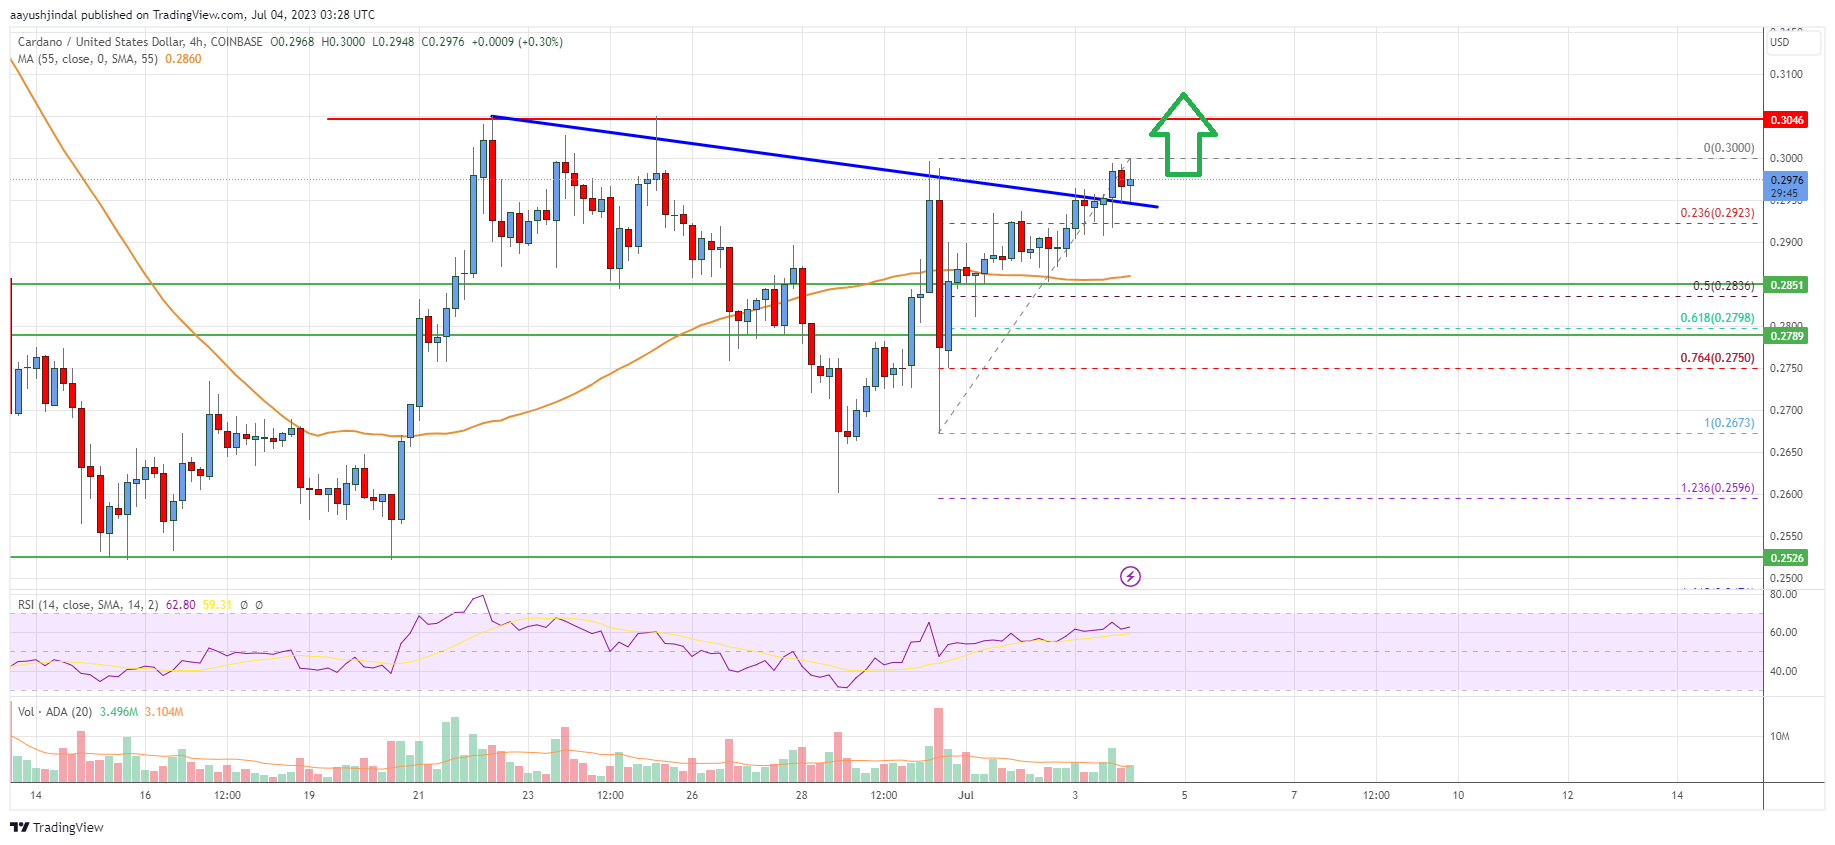 Cardano (ADA) Price Analysis: More Gains Seems Likely Above $0.30